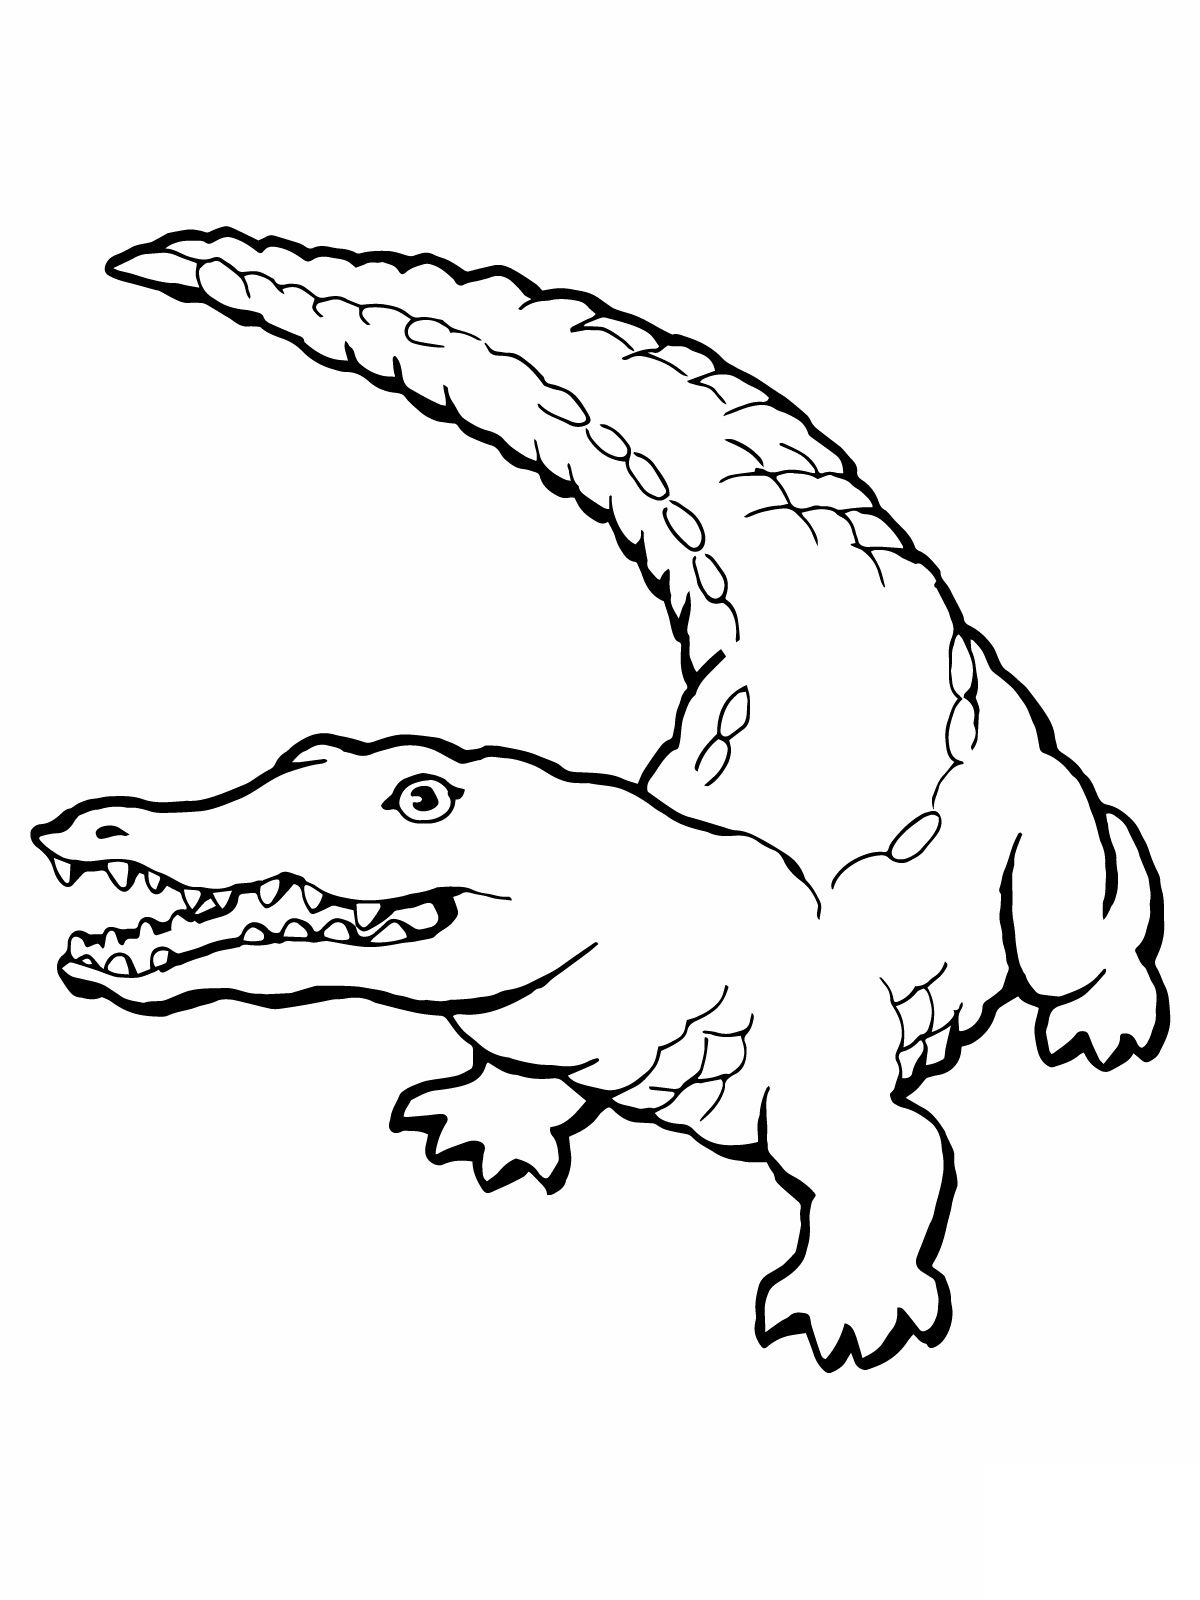 Free Printable Crocodile Coloring Pages For Kids - Free Printable Pictures Of Crocodiles